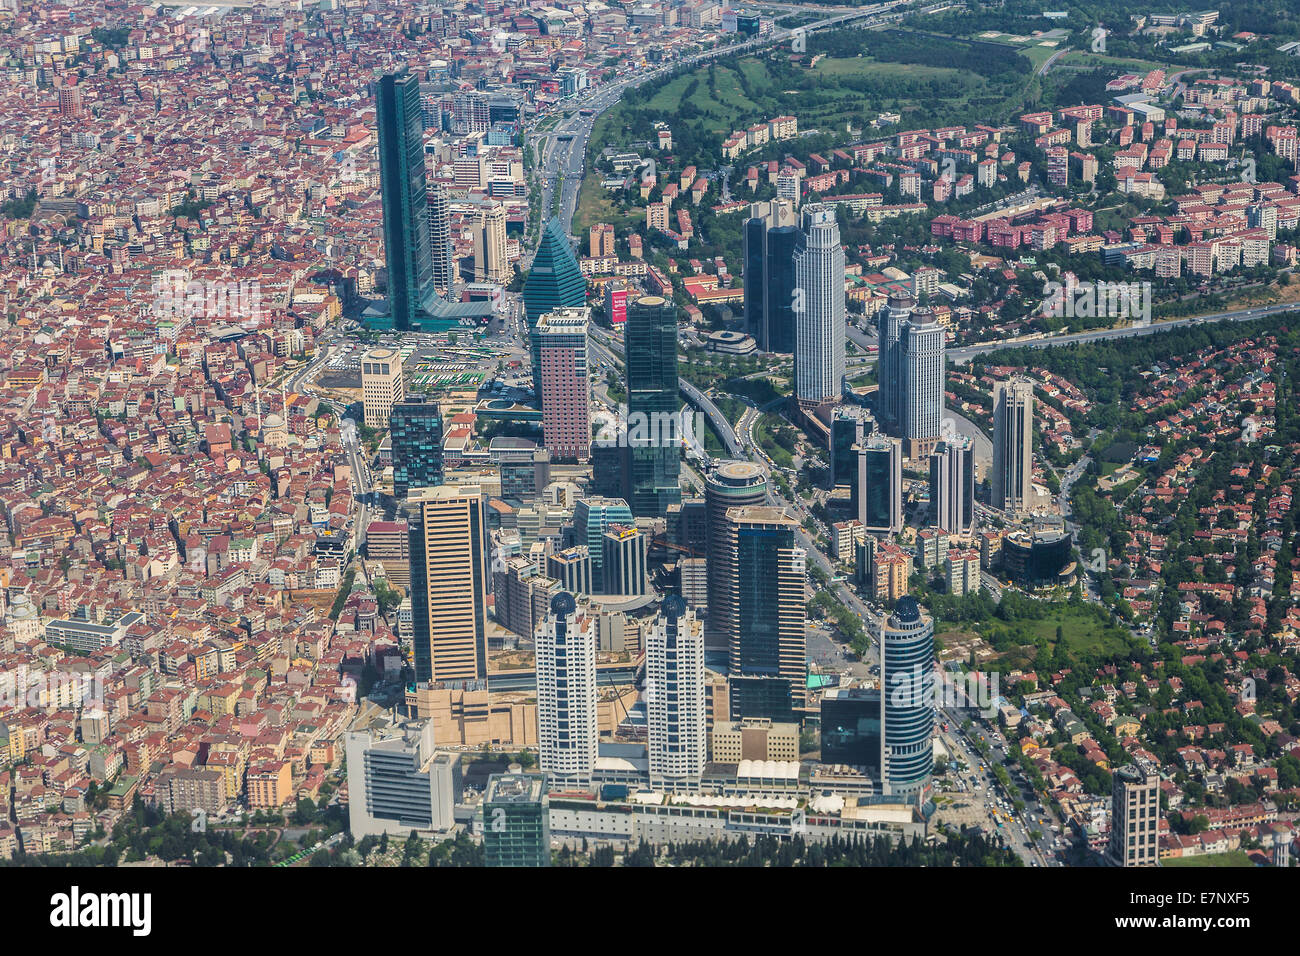 Istanbul, Levent, Turkey, architecture, buildings, city, contrast, market, new, red, skyline, skyscrapers, tall, travel, modern, Stock Photo